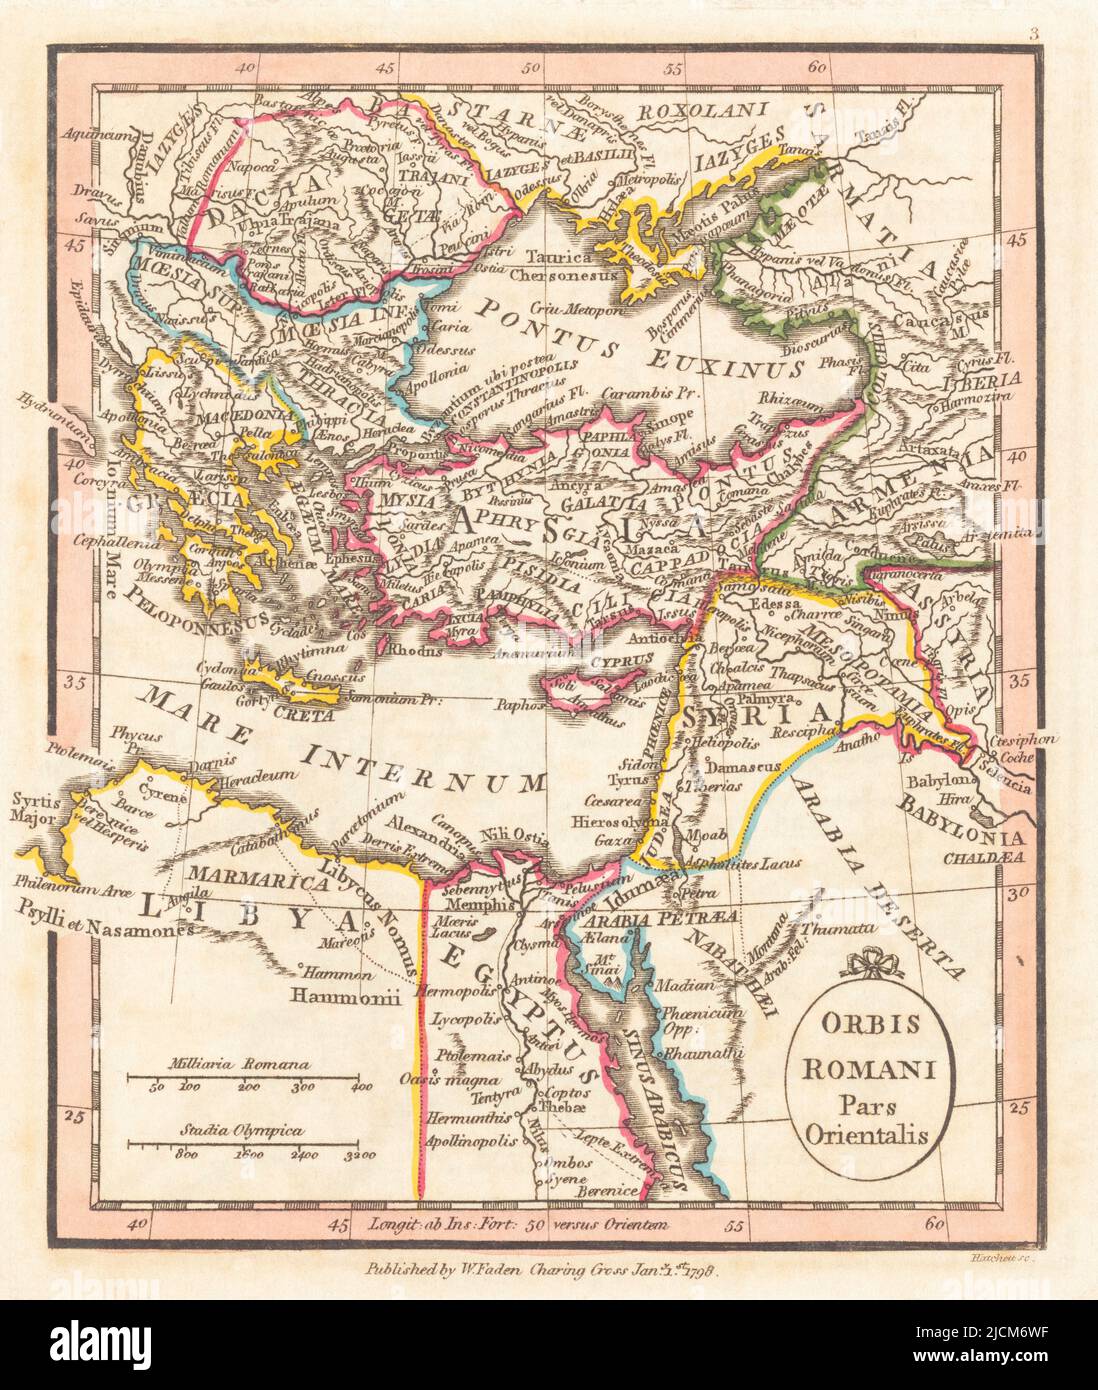 Orbis Romani, pars orientalis.  The Eastern Part of the Roman World. 1798 map by cartographer William Faden, engraved by Hatchett.  Faden was the royal geographer to King George III.  This map comes from his Atlas minimus universalis which was designed mainly for use in schools. Stock Photo